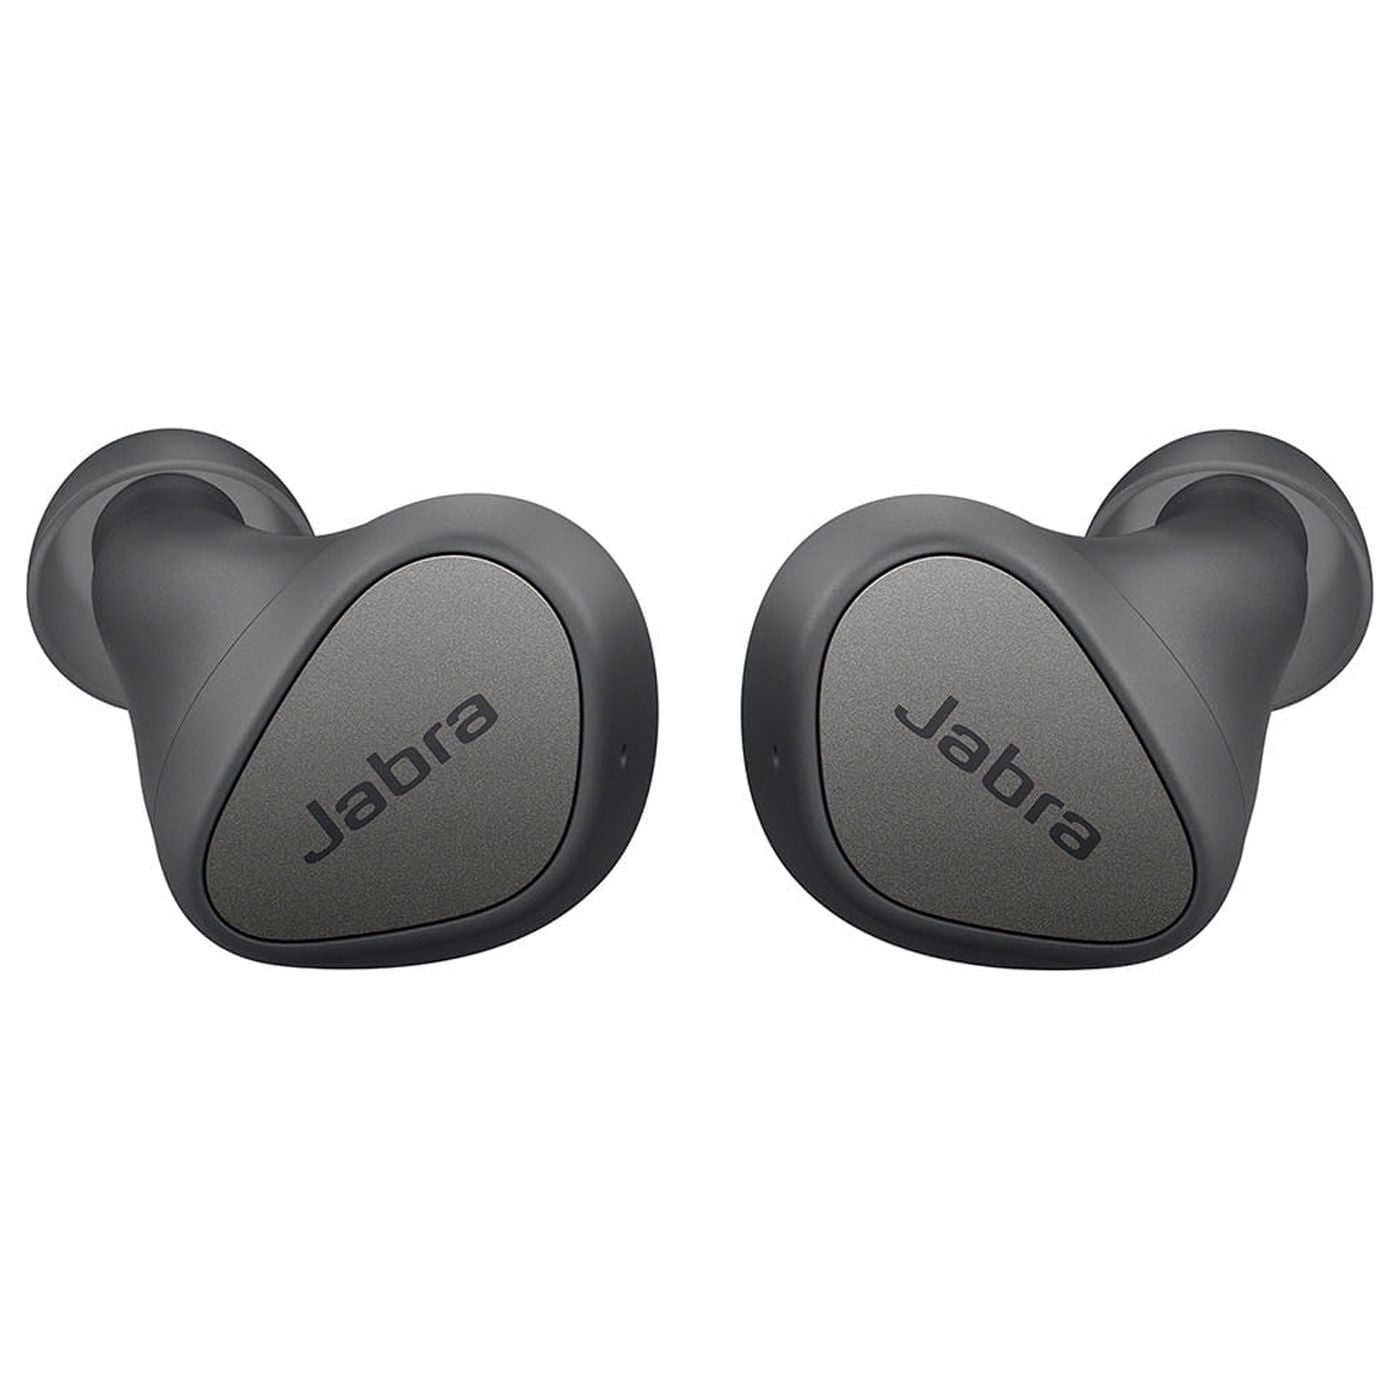 Bluetooth in Ear 3 Jabra Wireless Elite Earbuds, Lilac Noise Isolating,